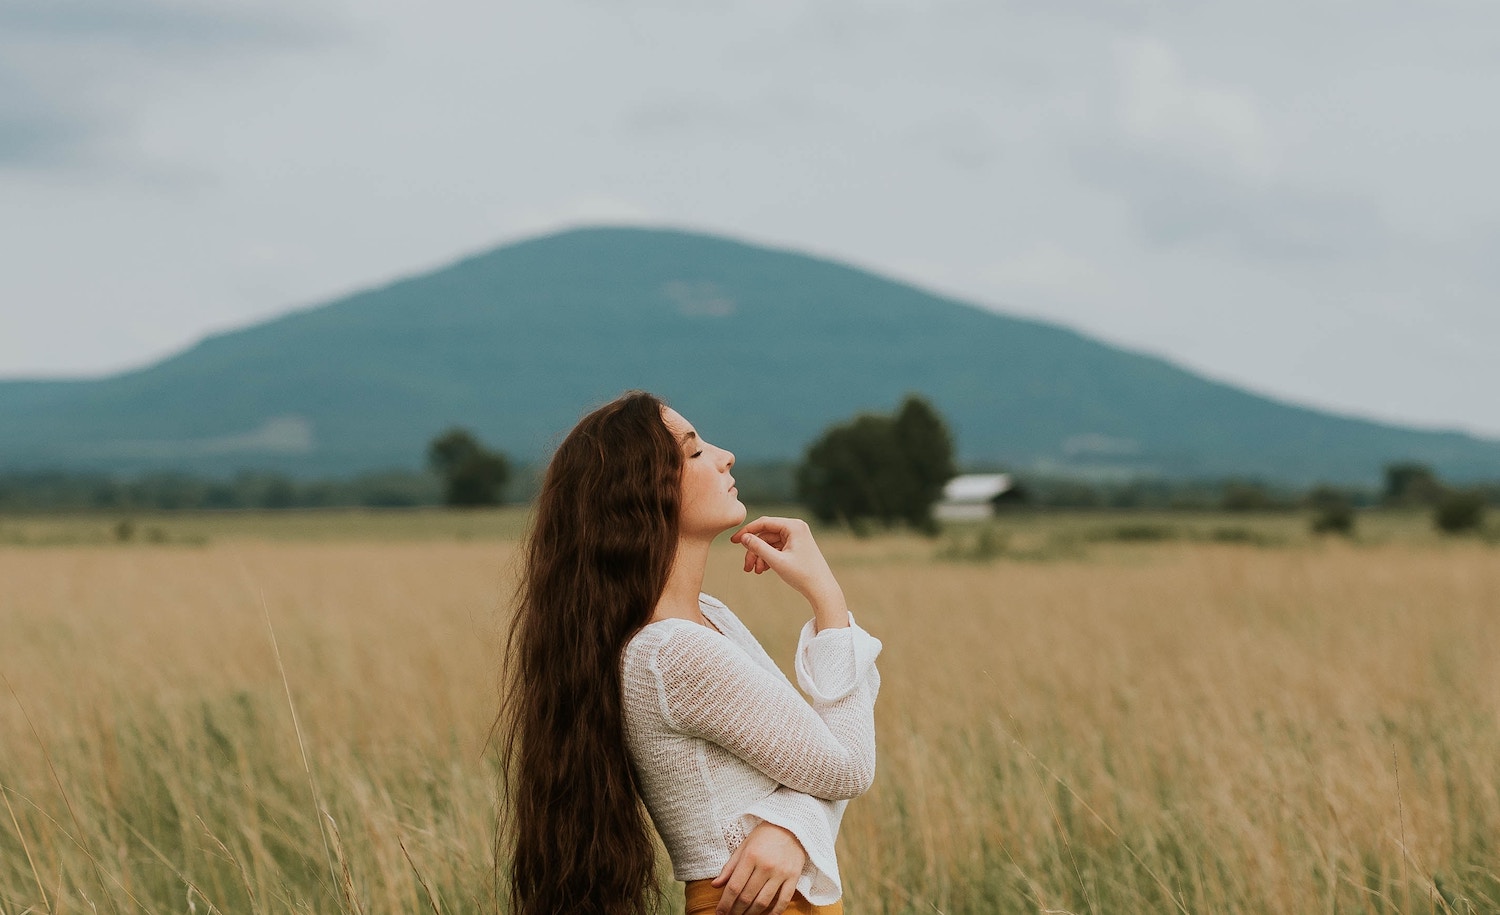 A highly sensitive person woman gazing off into the distance in a field